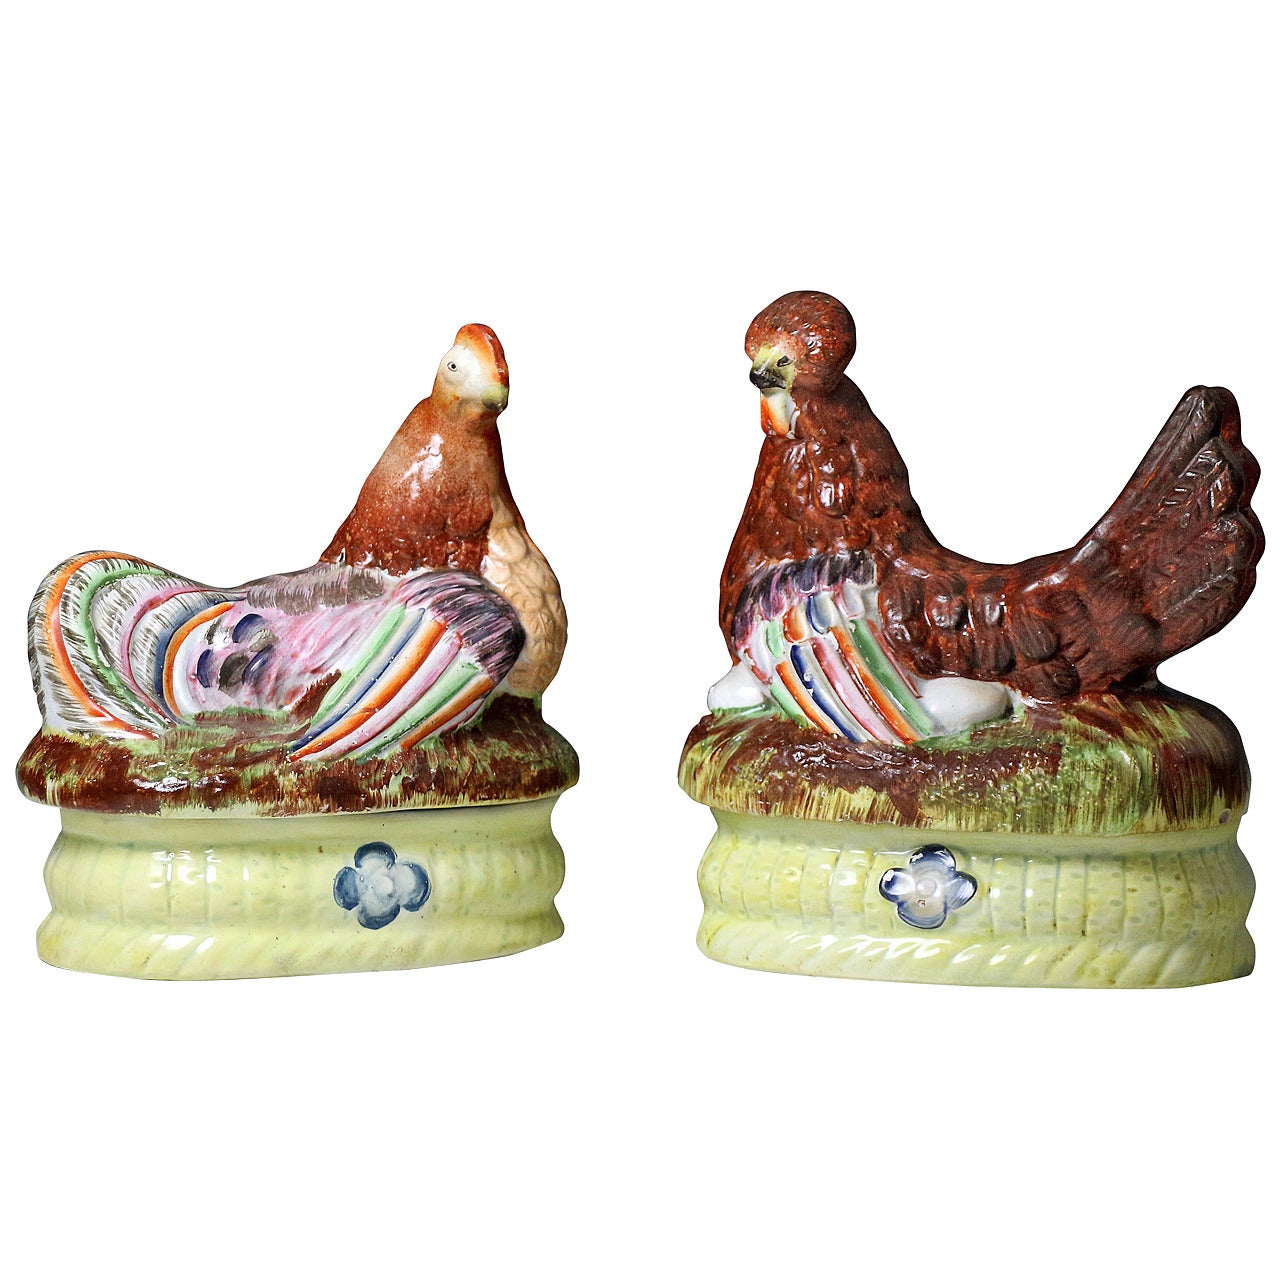 Staffordshire pottery figures of hens on baskets with a flower motif